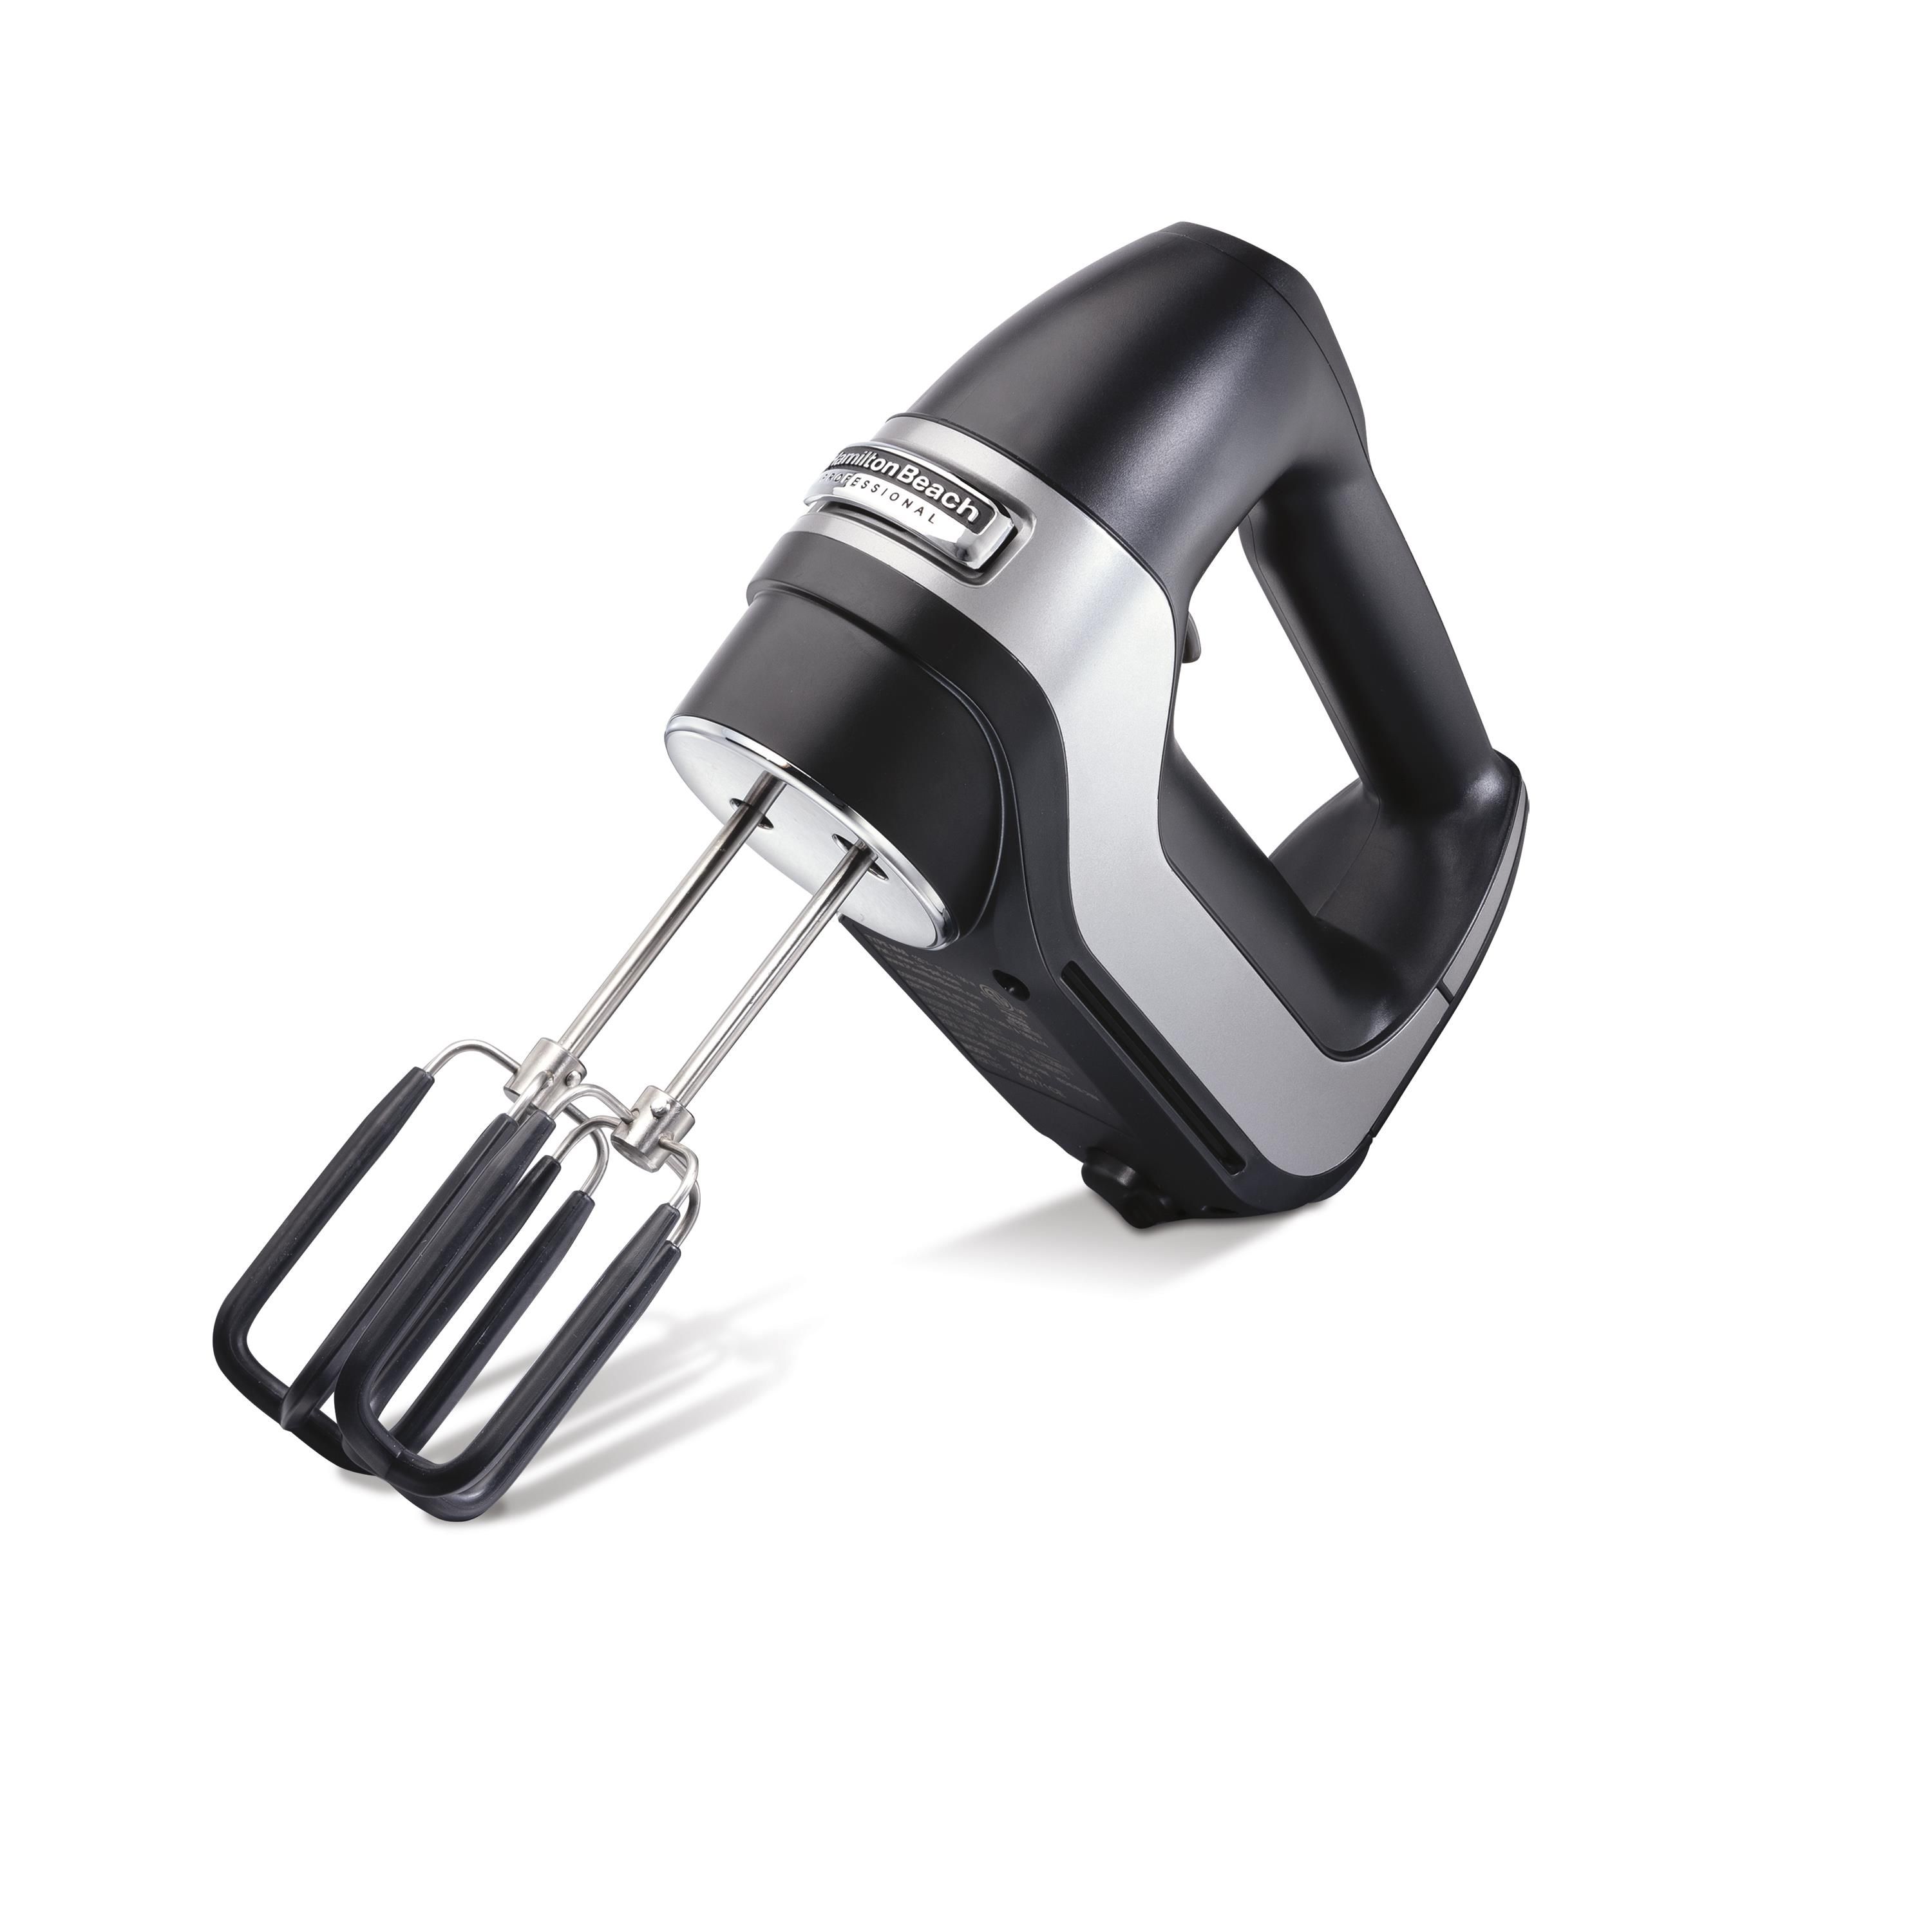 Hamilton Beach 6 Speed Hand Mixer with Easy Clean Beaters - Bed